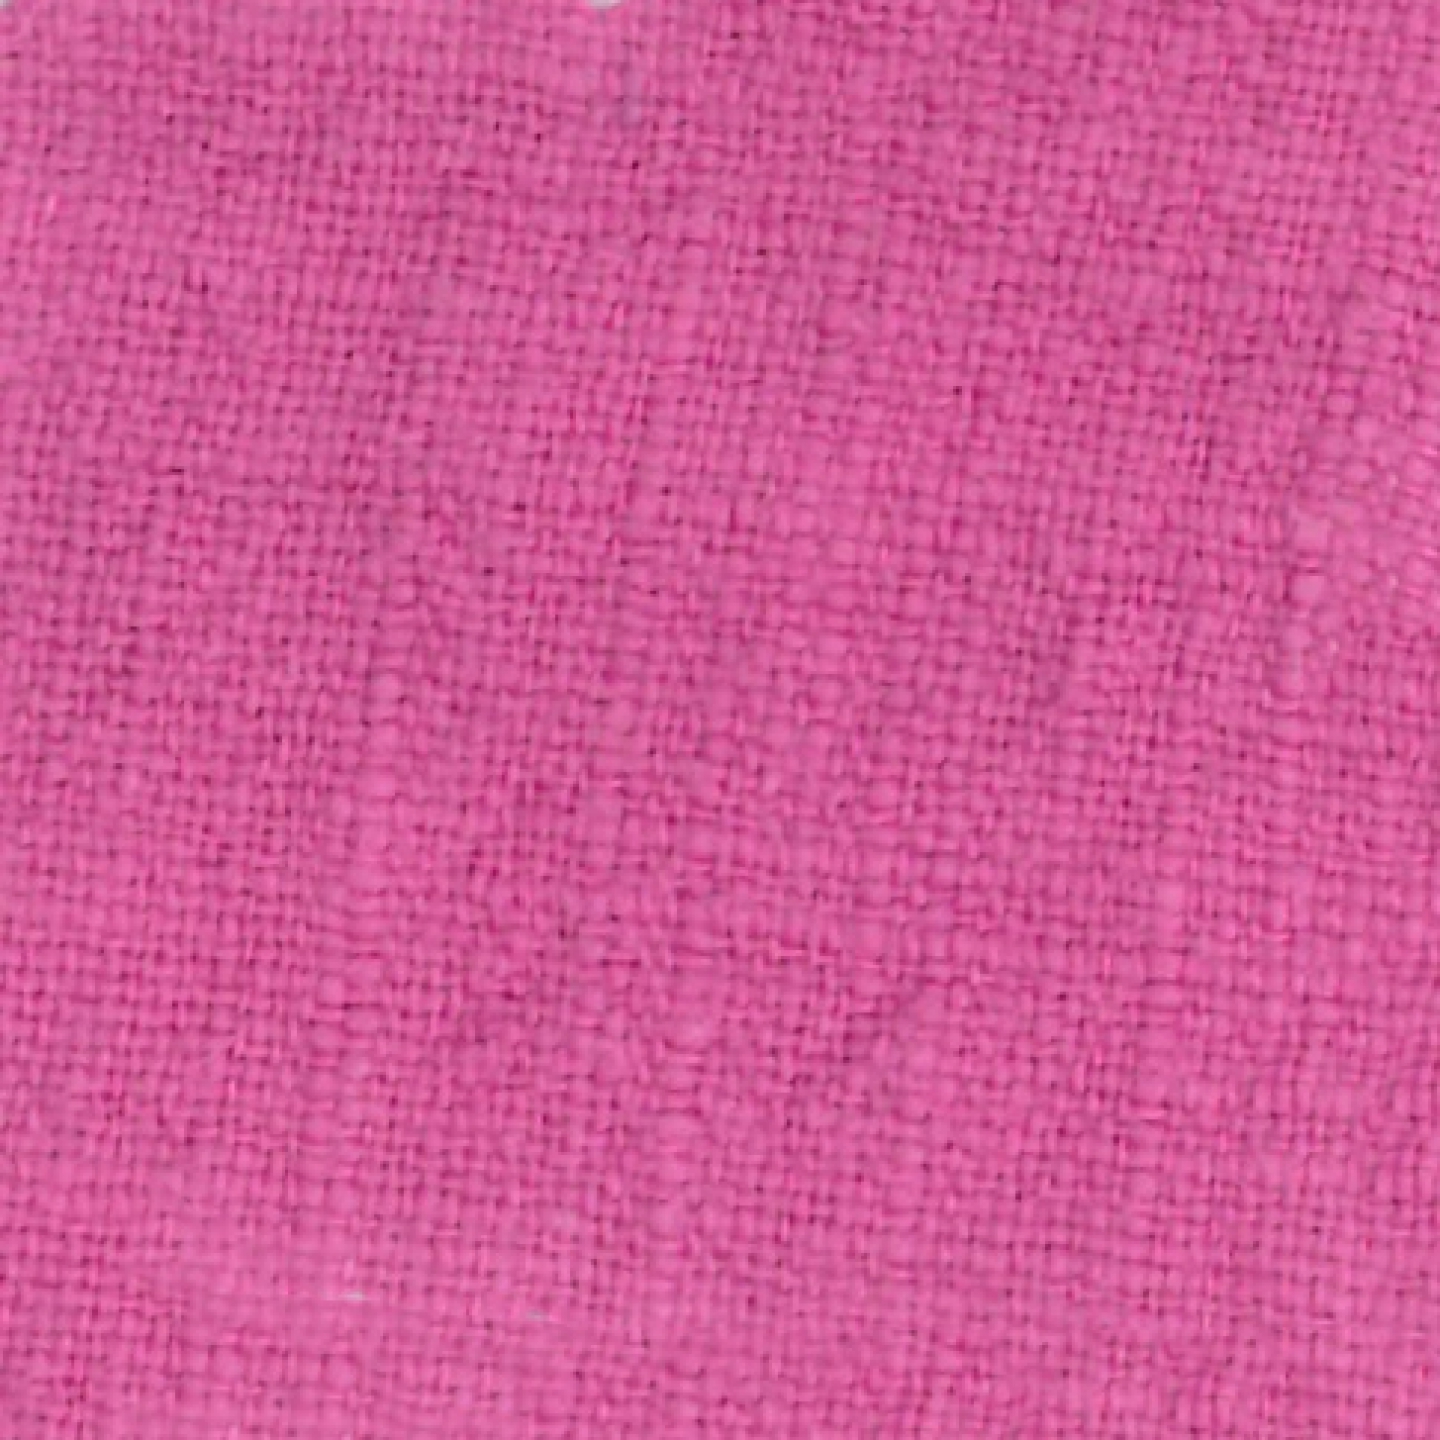 Stone Washed Linen Fabric in Fuchsia Pink